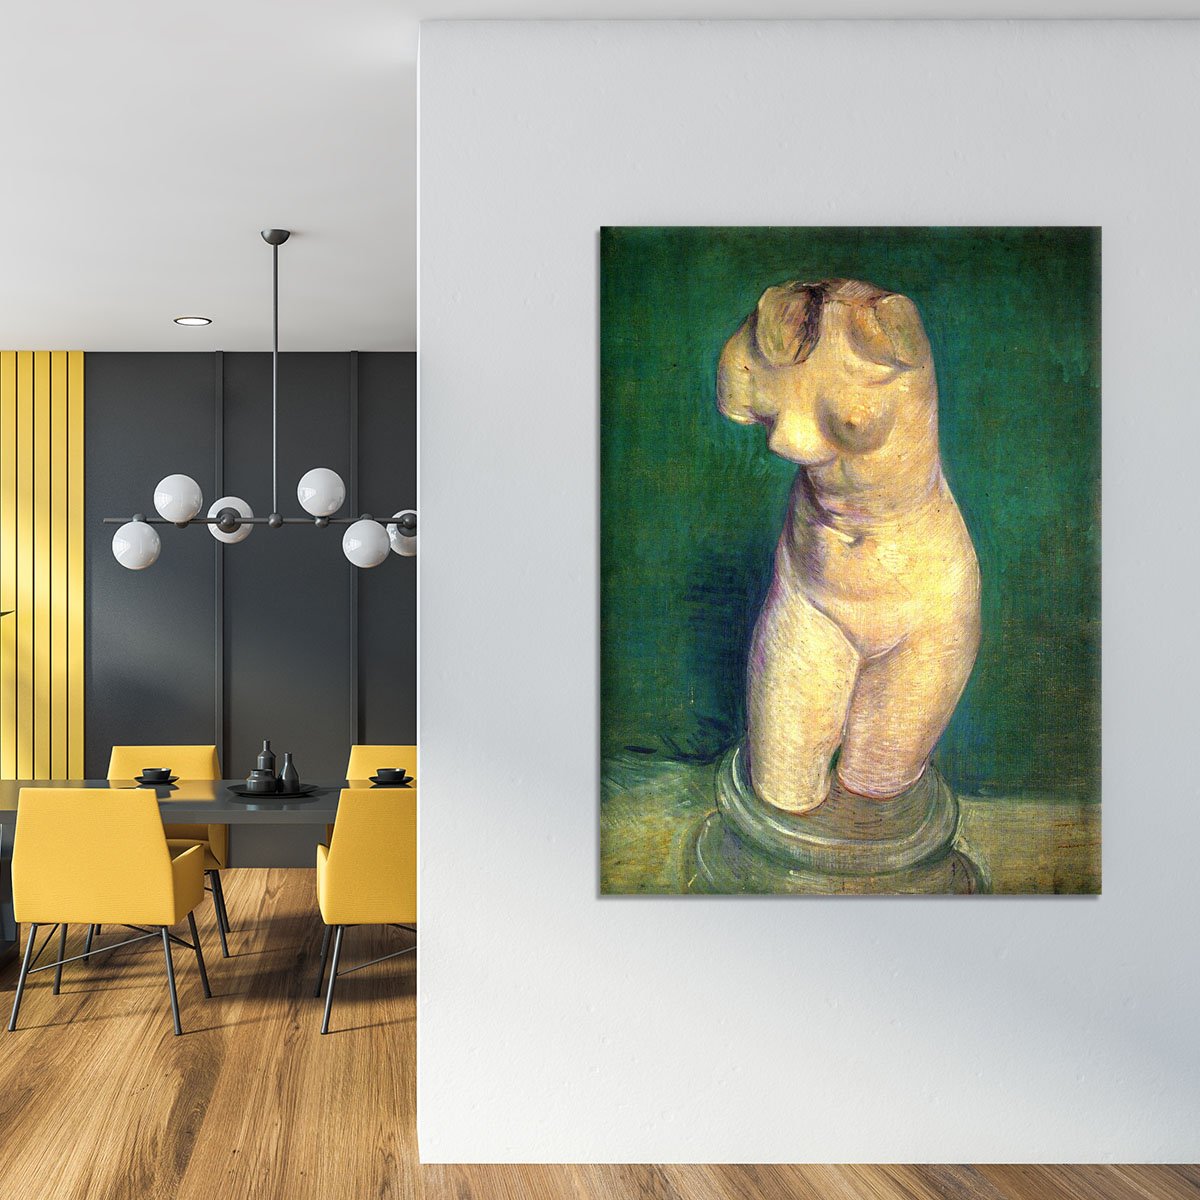 Plaster Statuette of a Female Torso by Van Gogh Canvas Print or Poster